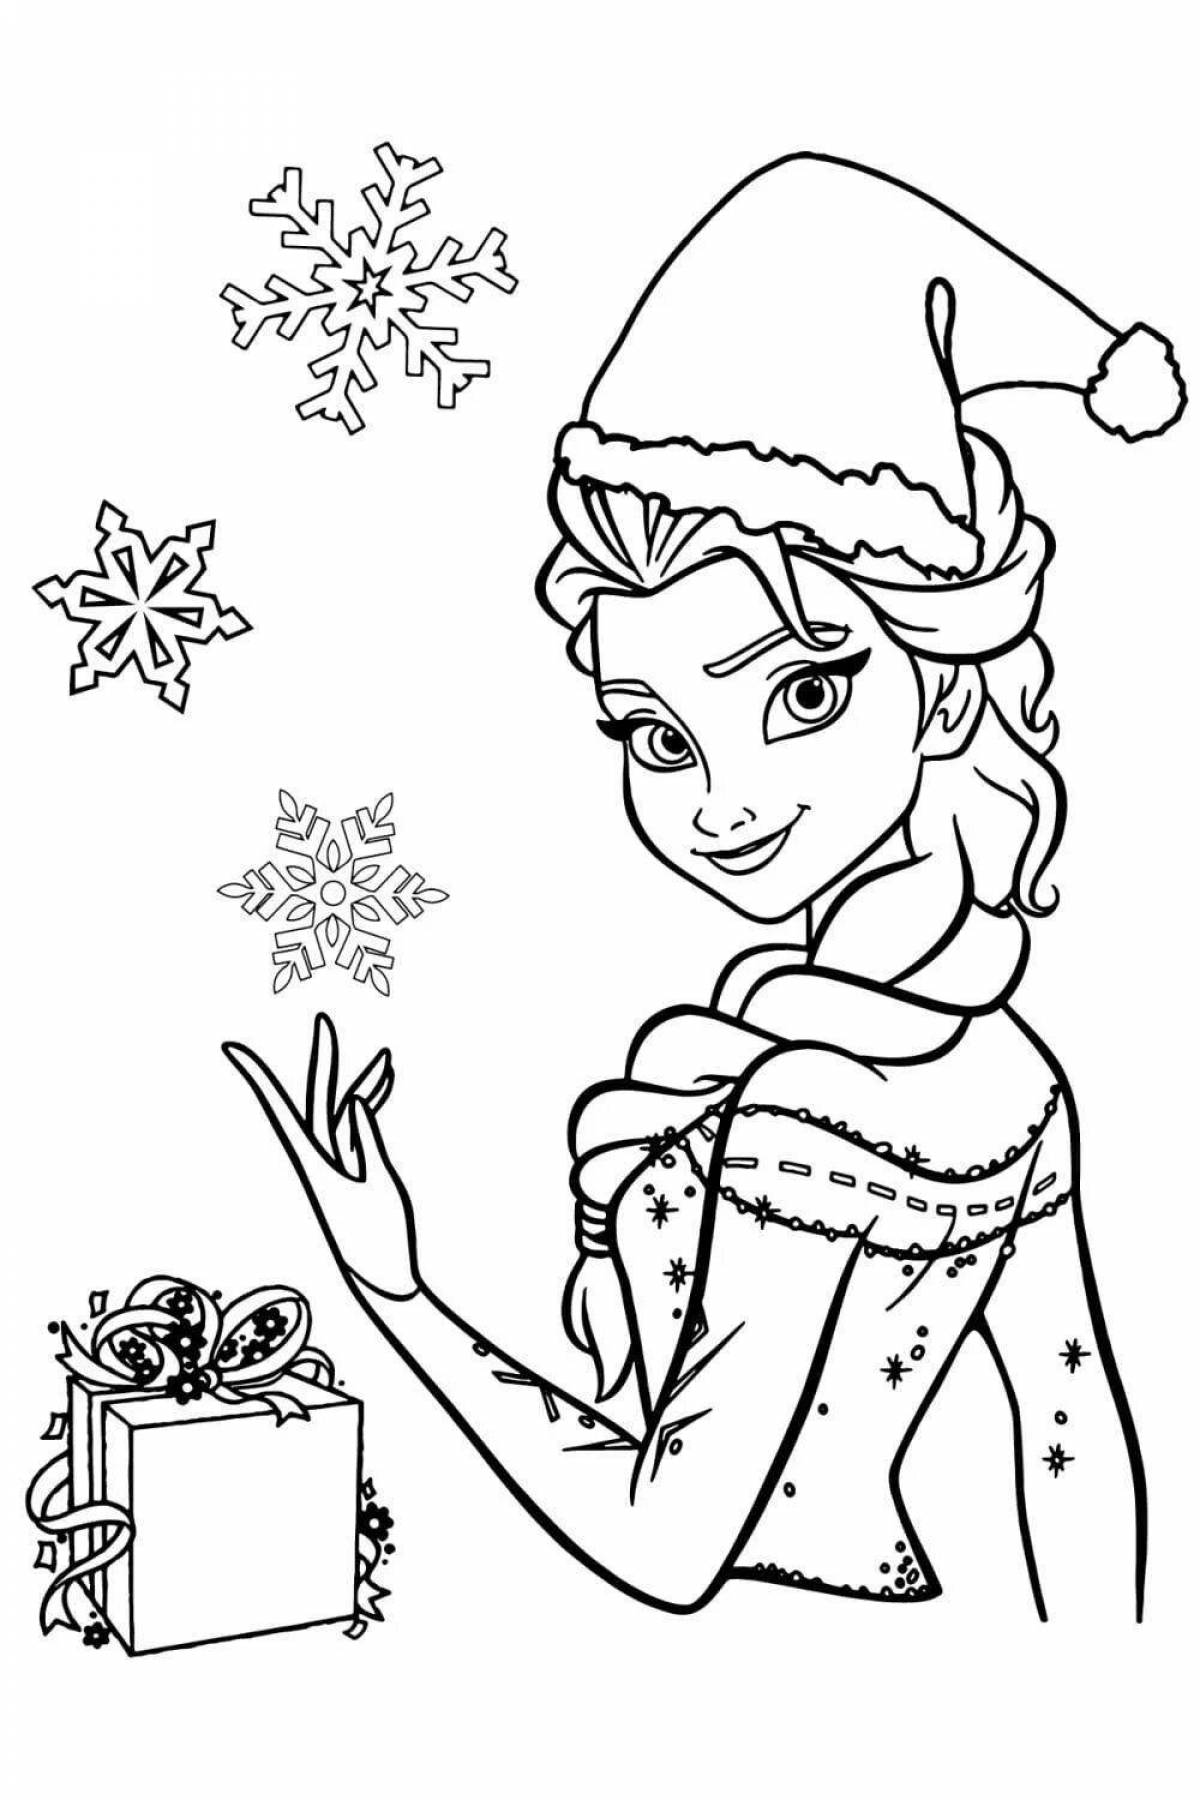 Adorable Christmas coloring book for girls